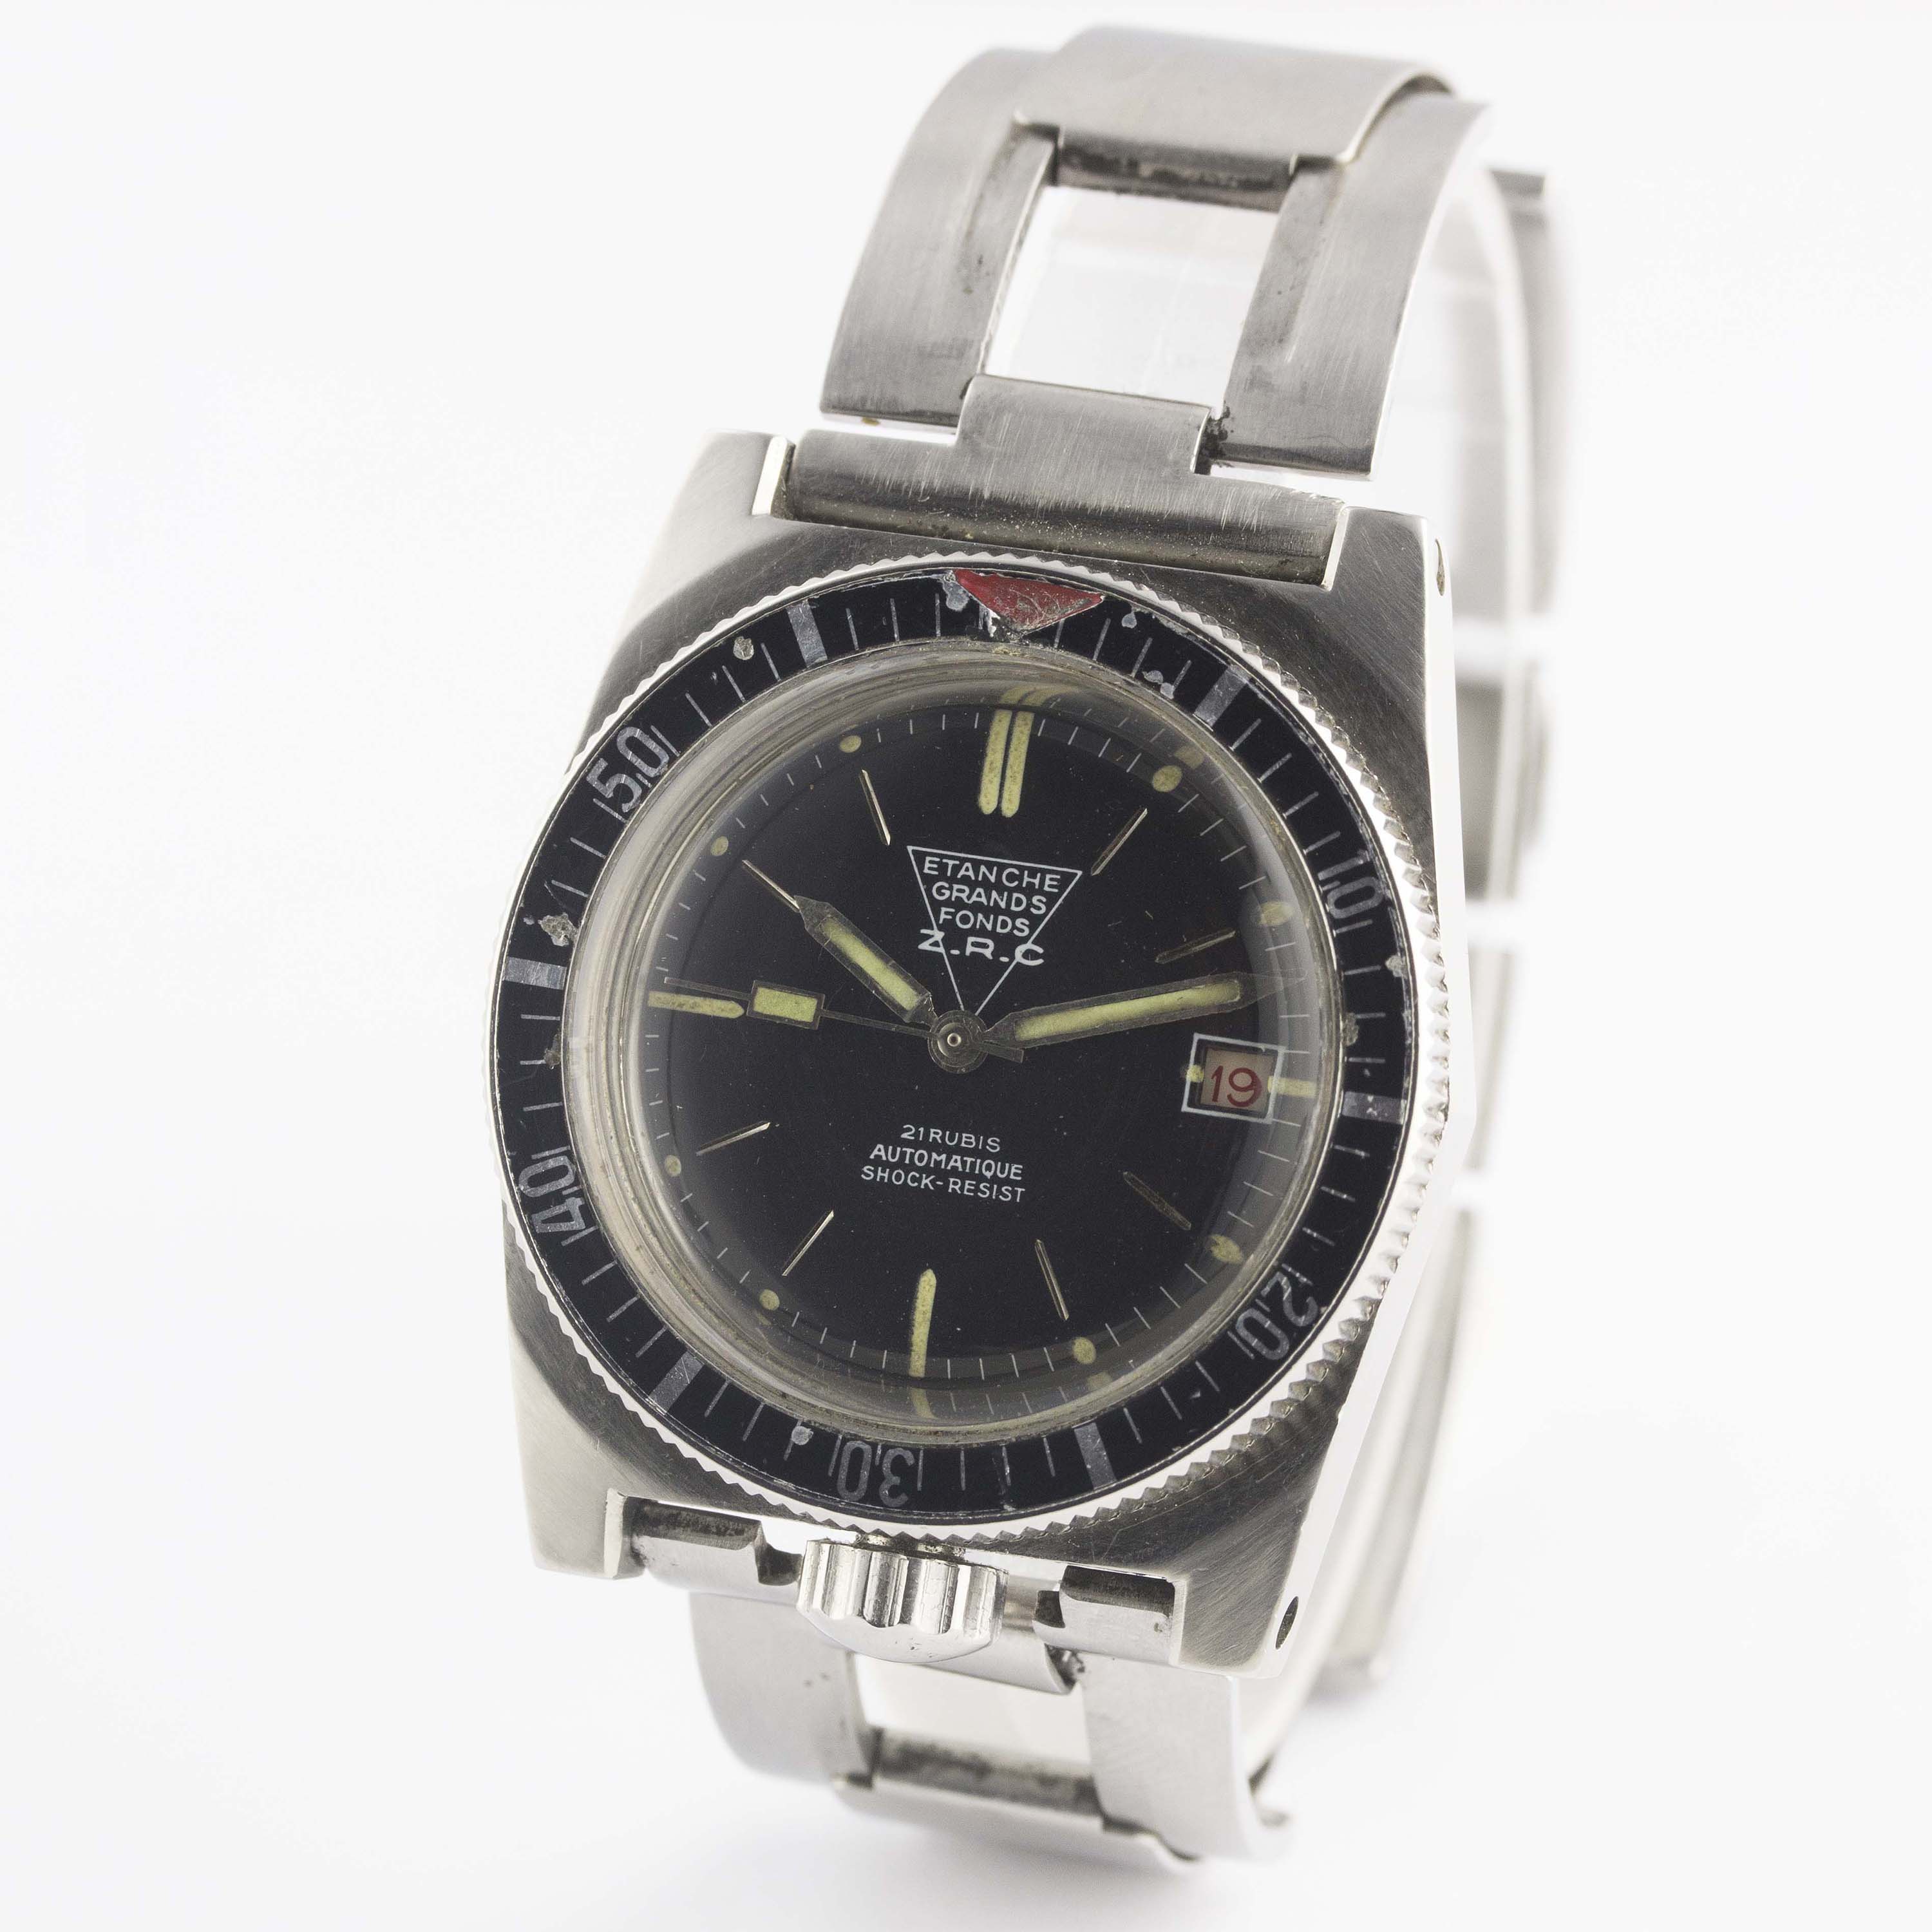 A VERY RARE GENTLEMAN'S STAINLESS STEEL Z.R.C. ETANCHE GRANDS FONDS 300M "SERIES III" AUTOMATIC - Image 4 of 11